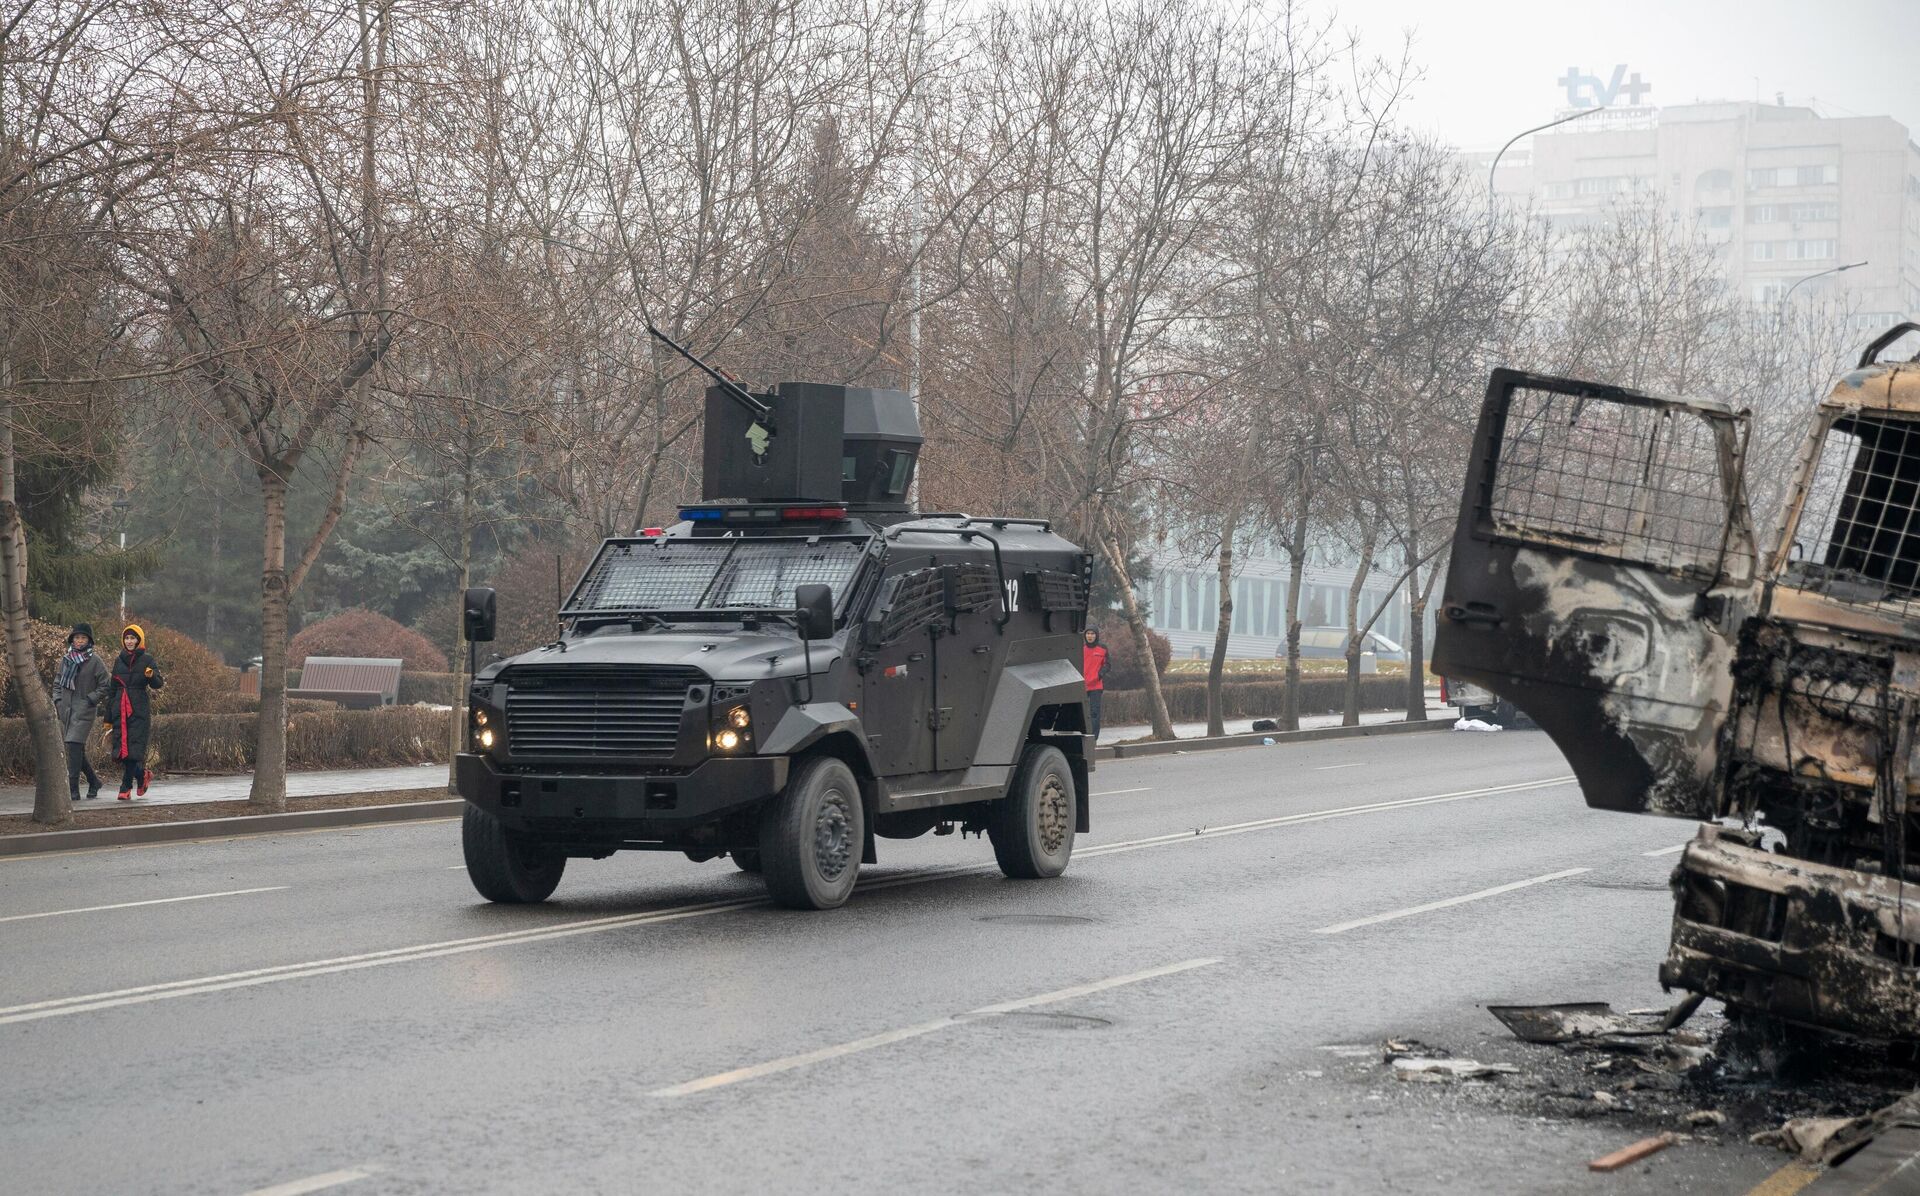 A military vehicle moves along a street in central Almaty on 7 January 2022, after violence that erupted following protests over hikes in fuel prices. - Sputnik International, 1920, 08.01.2022